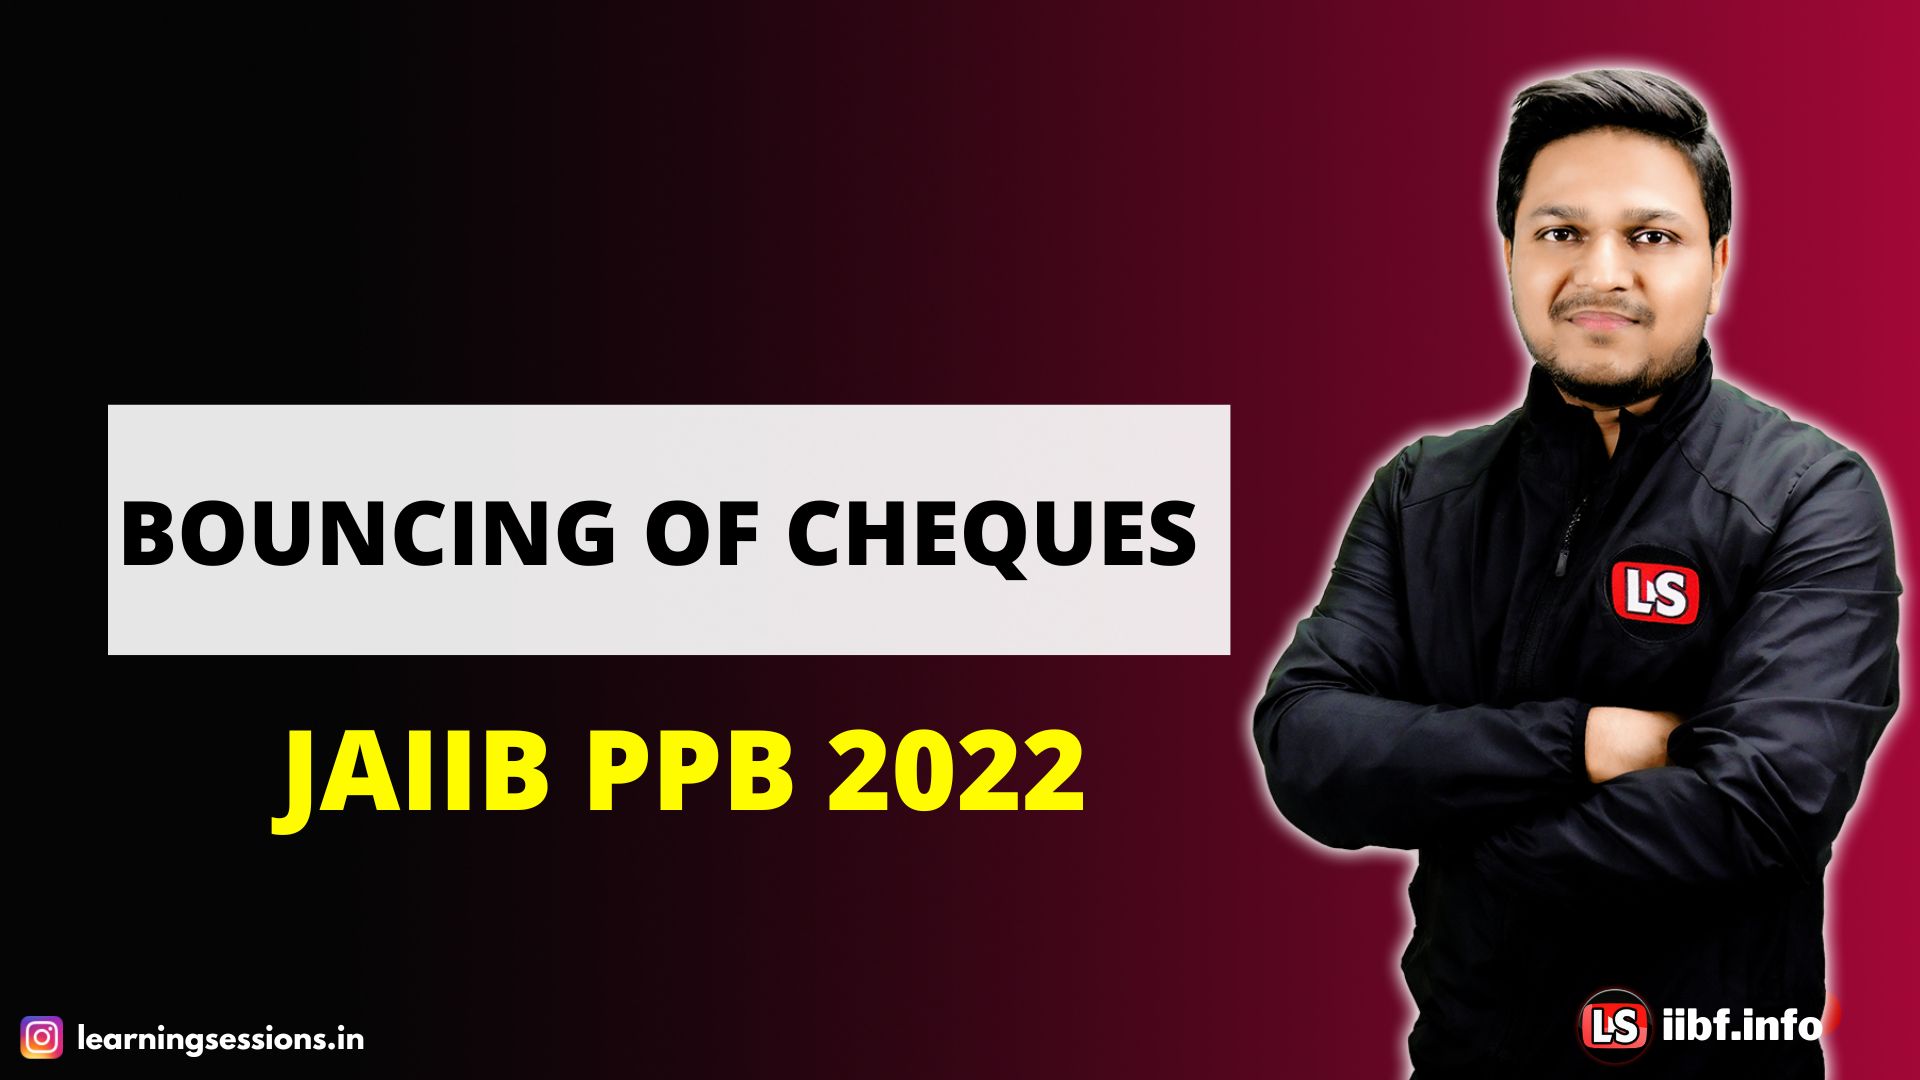 PRINCIPLES & PRACTICES OF BANKING 2022 | BOUNCING OF CHEQUES